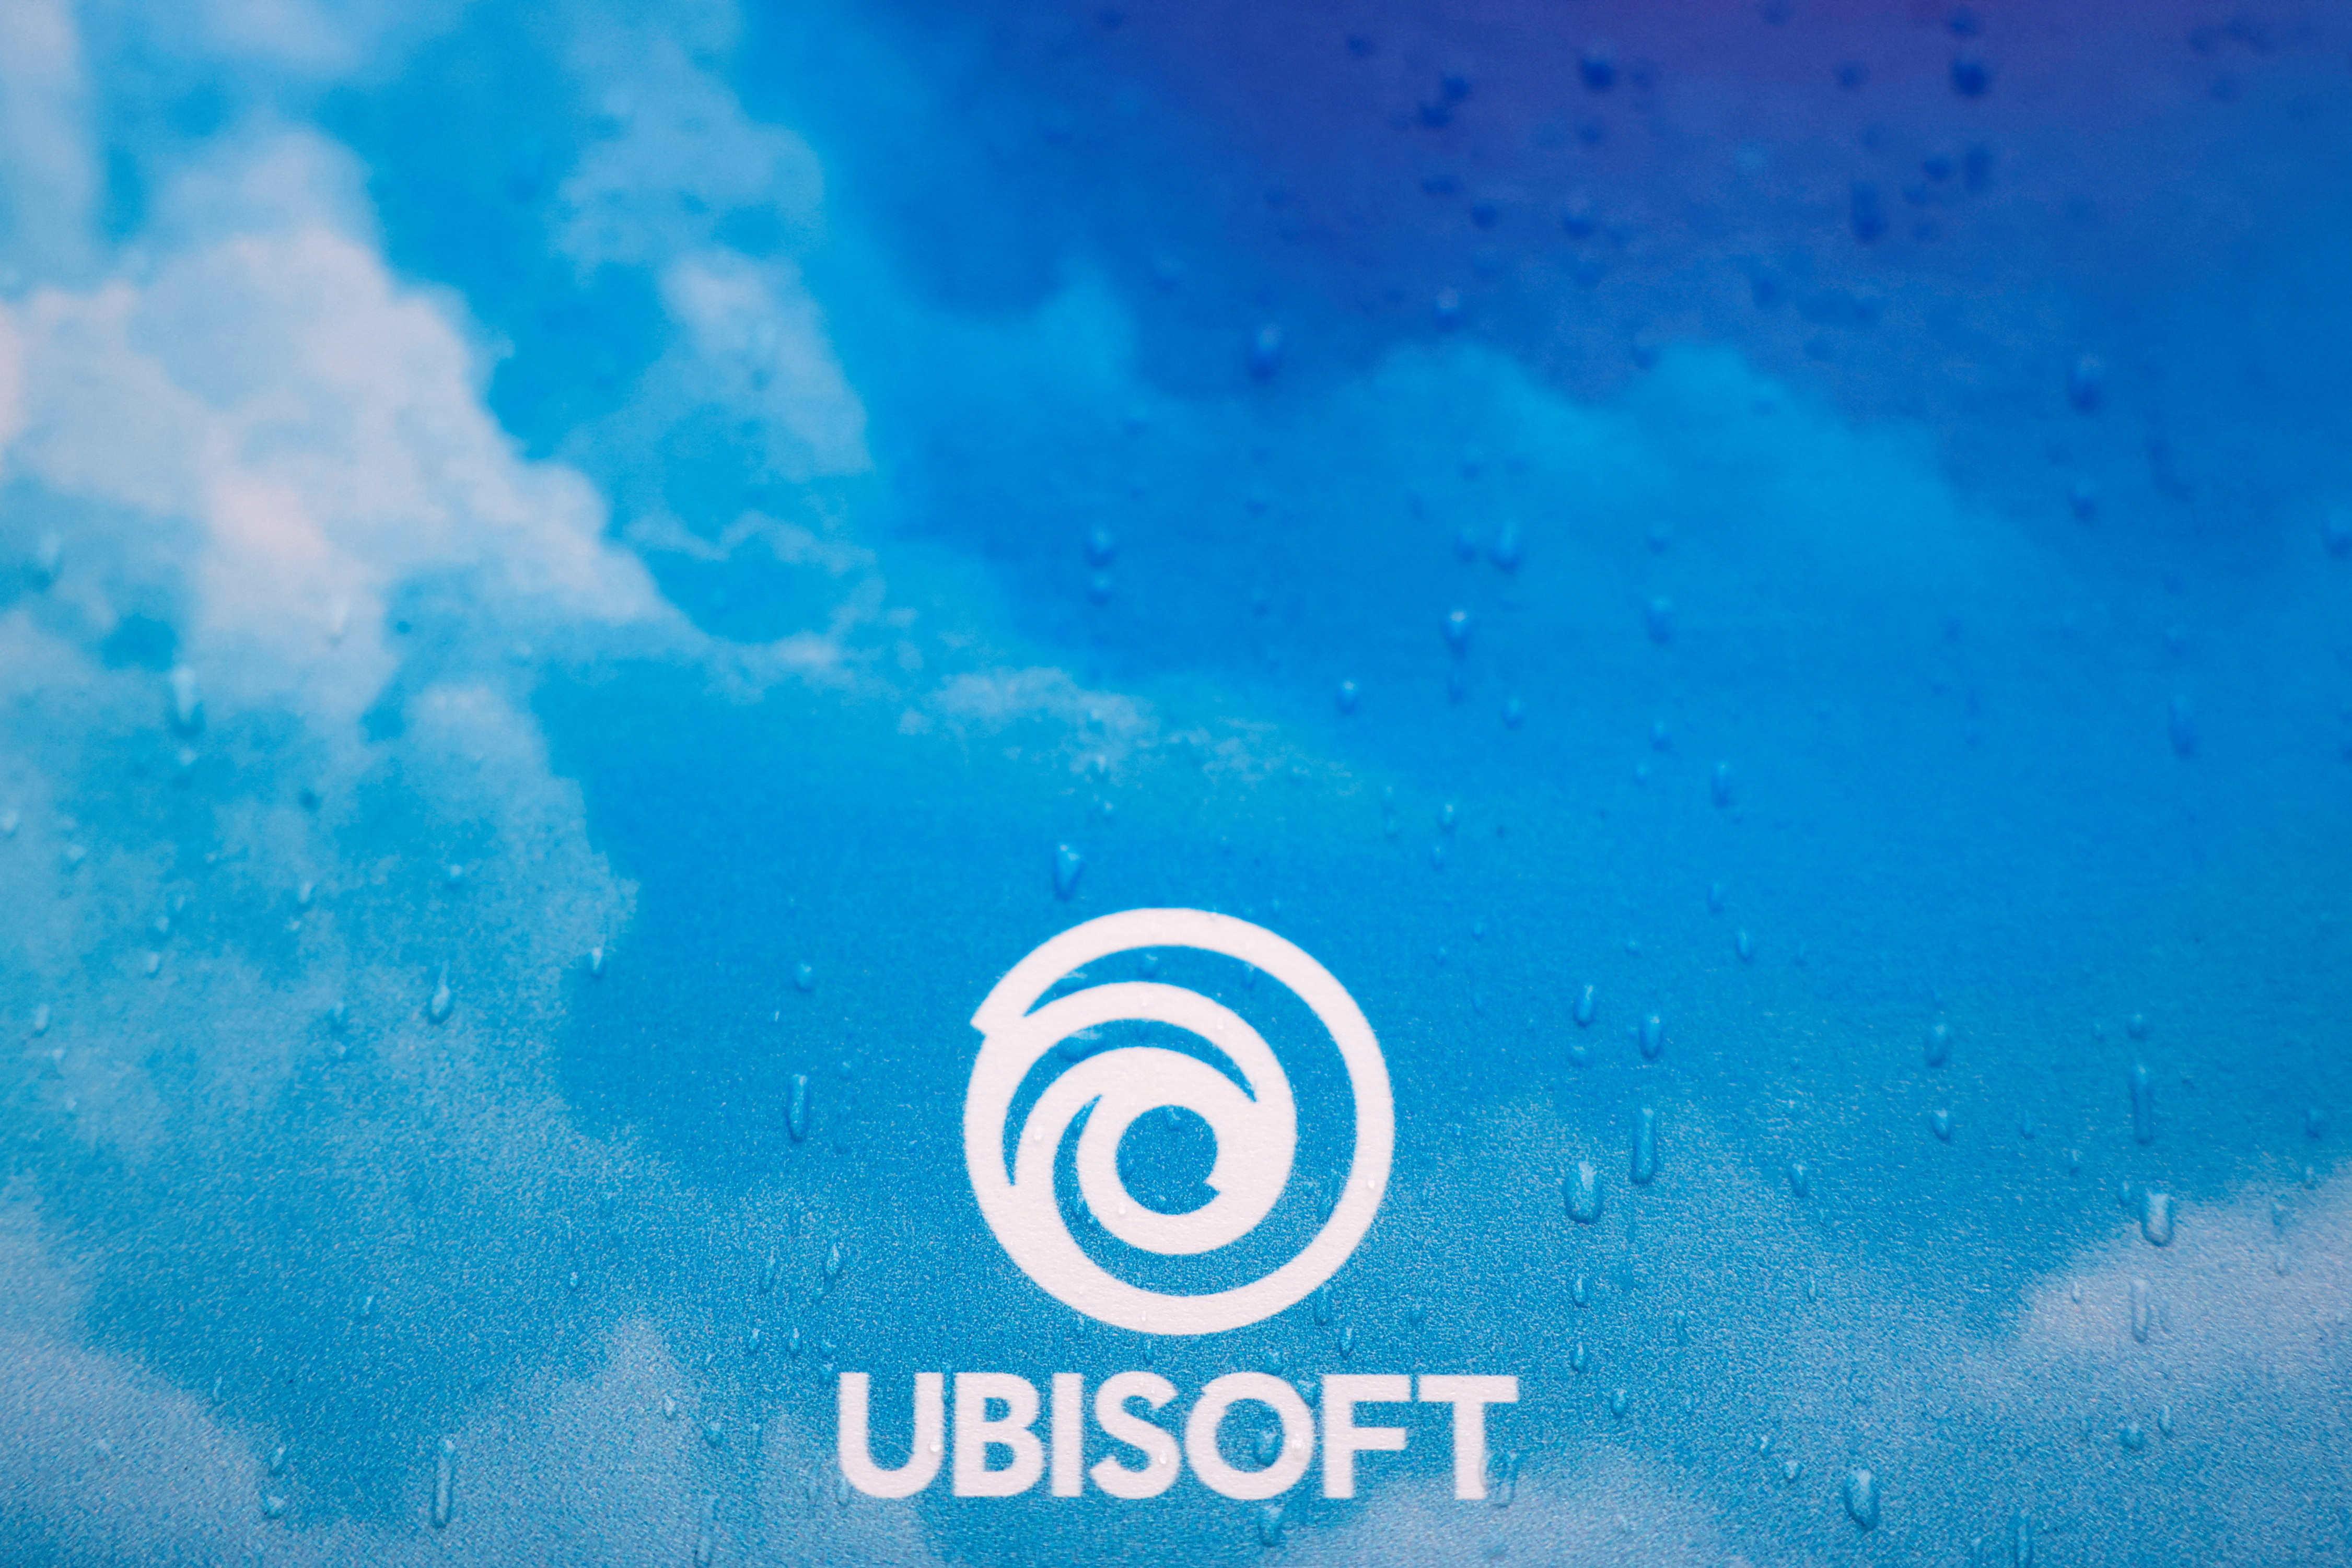 What is the large game that Ubisoft is releasing before April